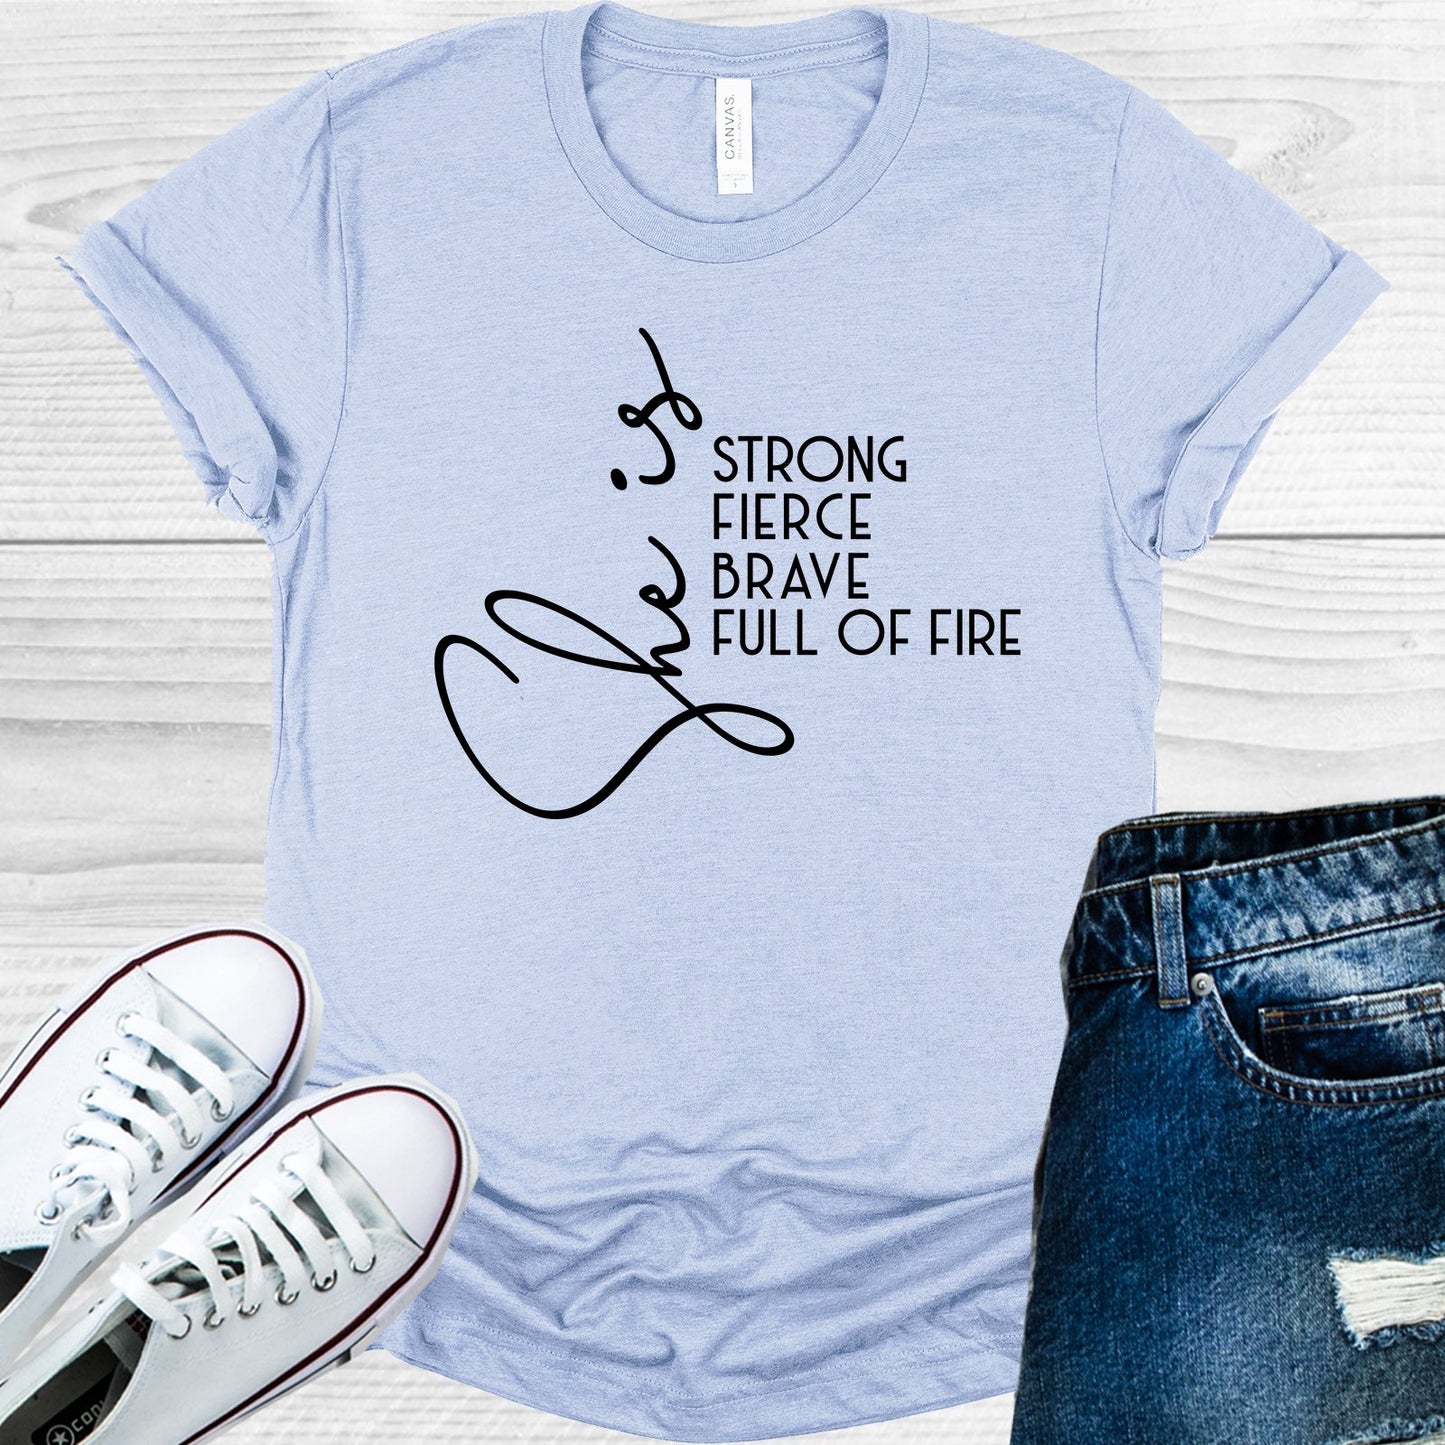 She Is Strong Fierce Brave Full Of Fire Graphic Tee Graphic Tee